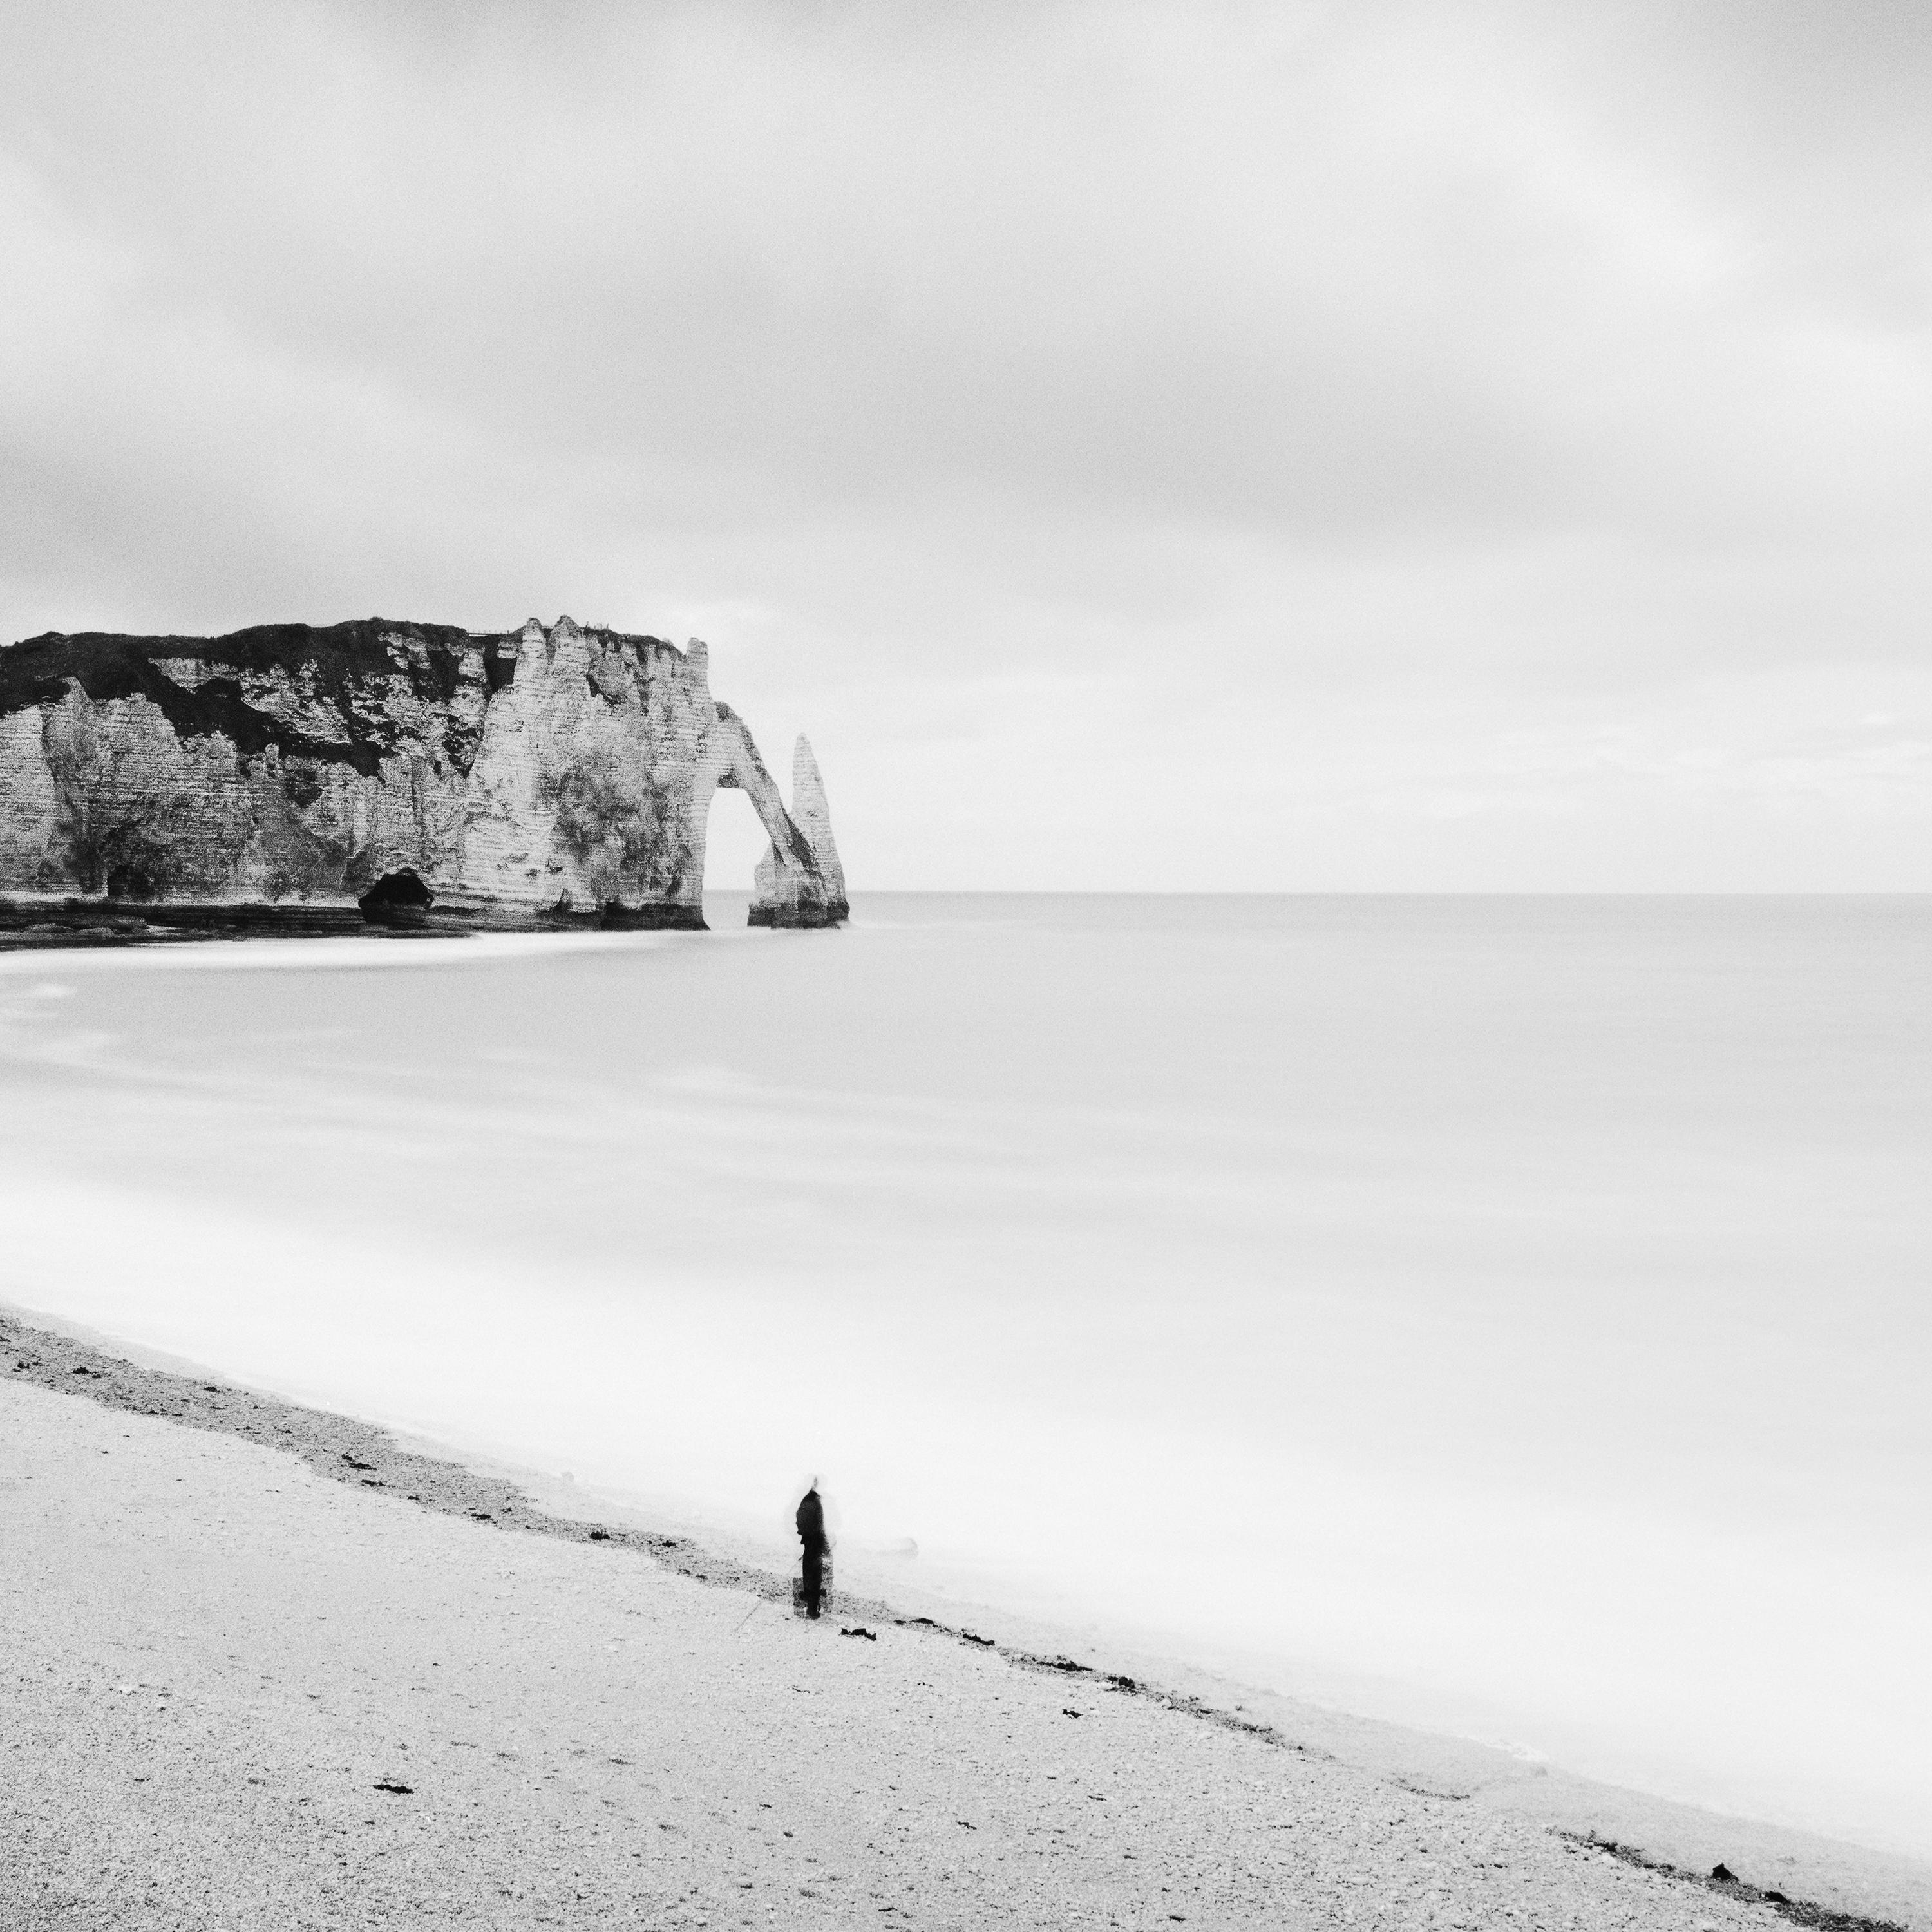 Black and white fine art landscape photography. Beautiful beach with fishermen and the impressive rock formation of Etretat, France.. Archival pigment ink print as part of a limited edition of 9. All Gerald Berghammer prints are made to order in